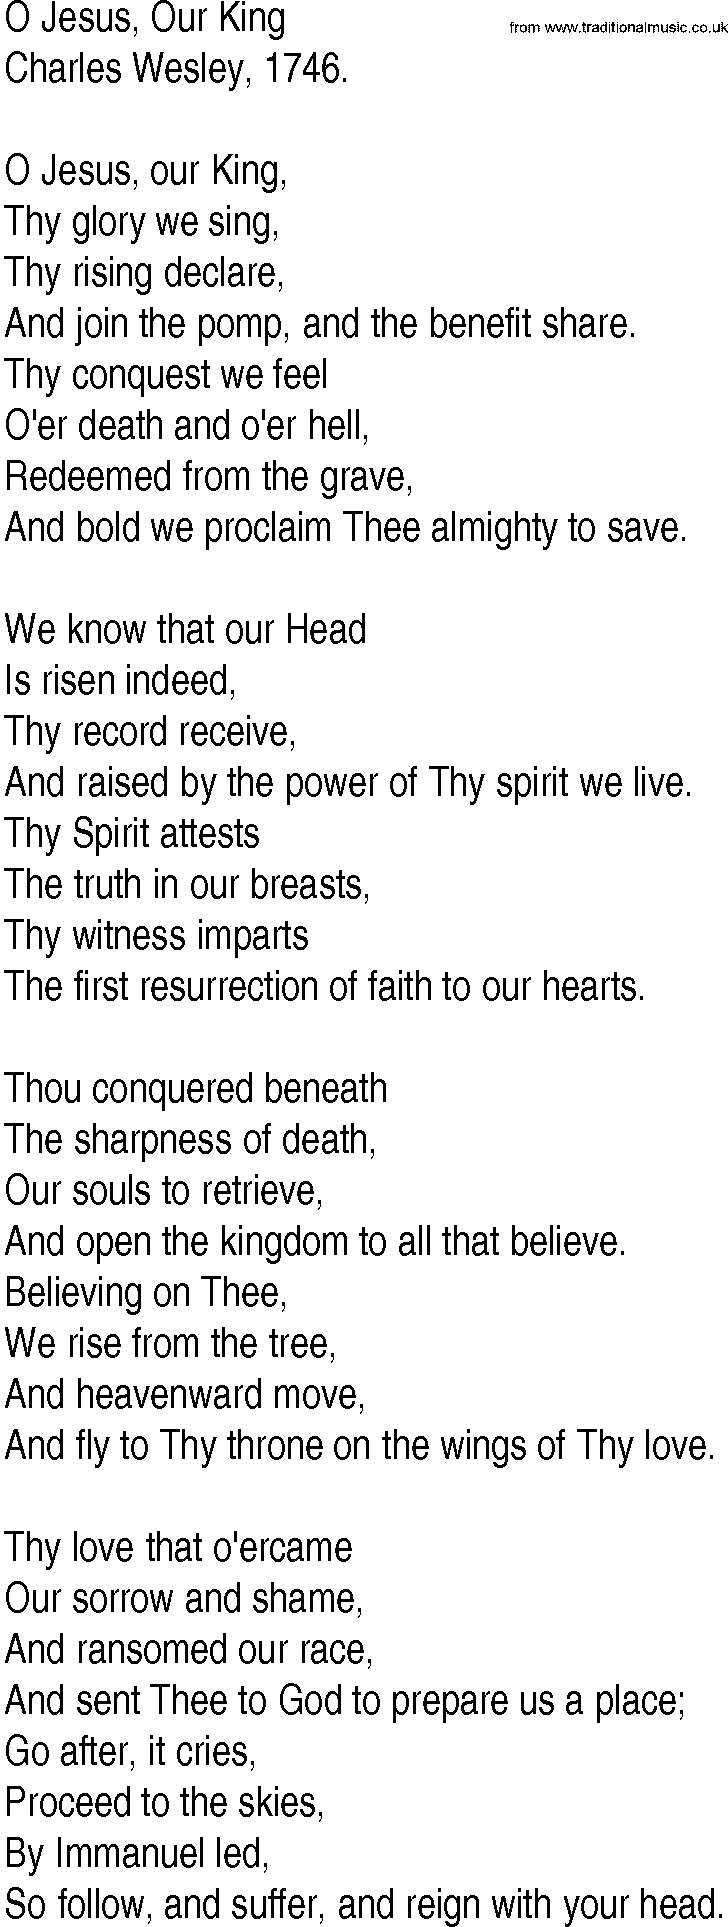 Hymn and Gospel Song: O Jesus, Our King by Charles Wesley lyrics